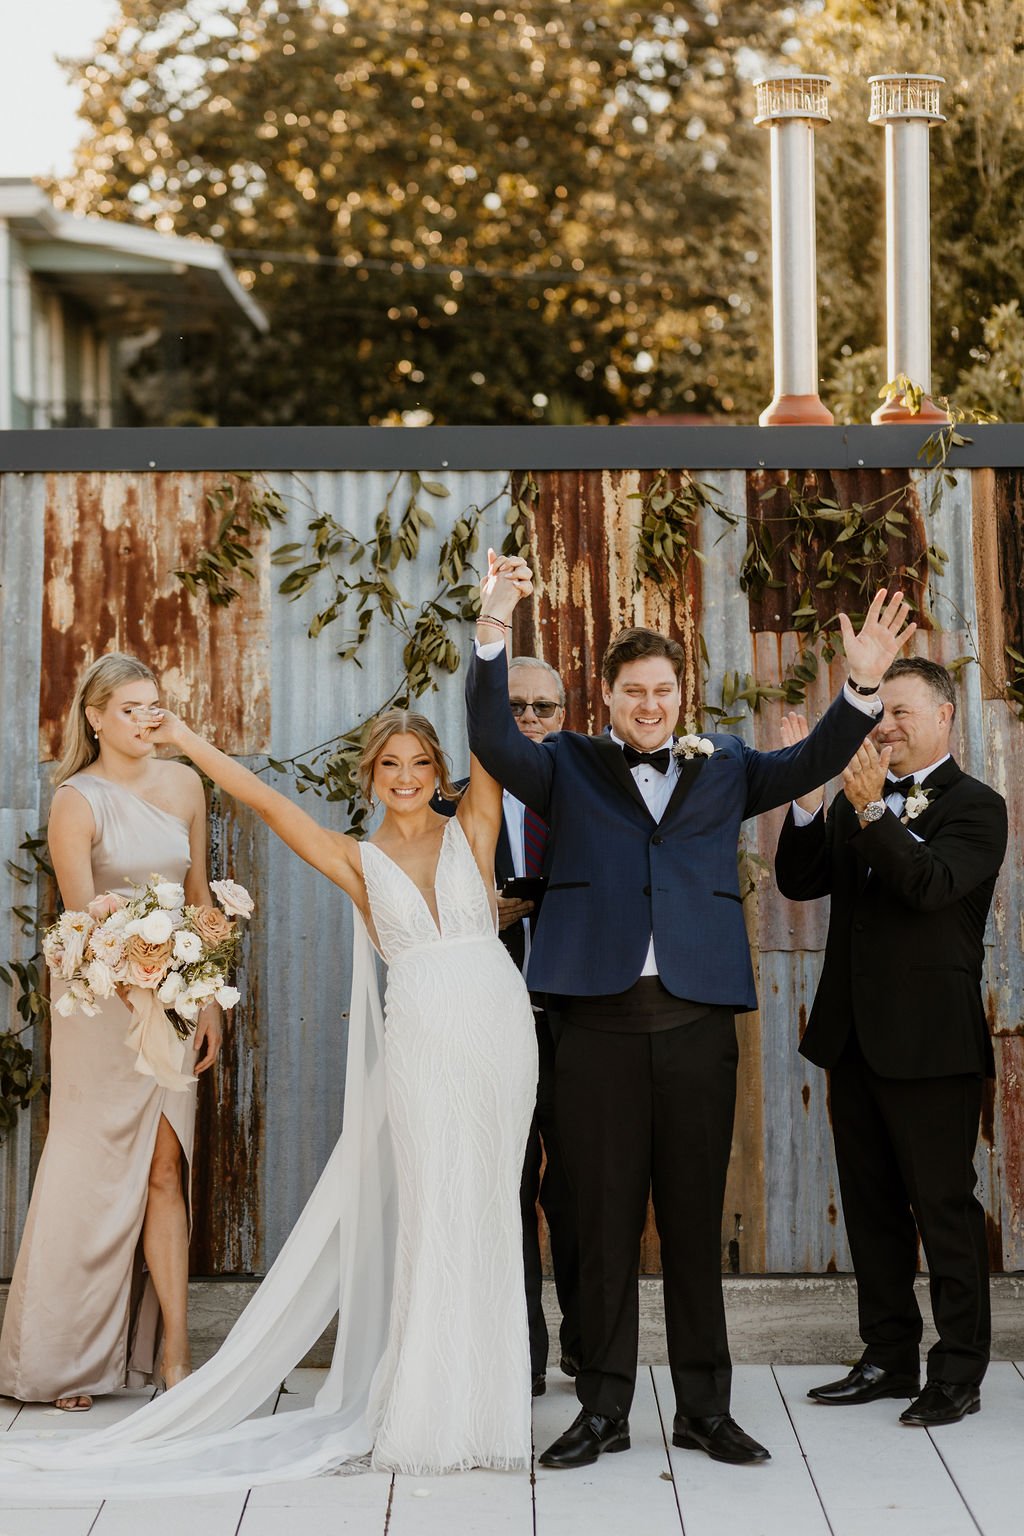 olivia-and-ryans-modern-industrial-chic-savannah-wedding-at-kehoe-iron-works-planned-by-savannah-wedding-planner-and-florist-ivory-and-beau-12.jpg